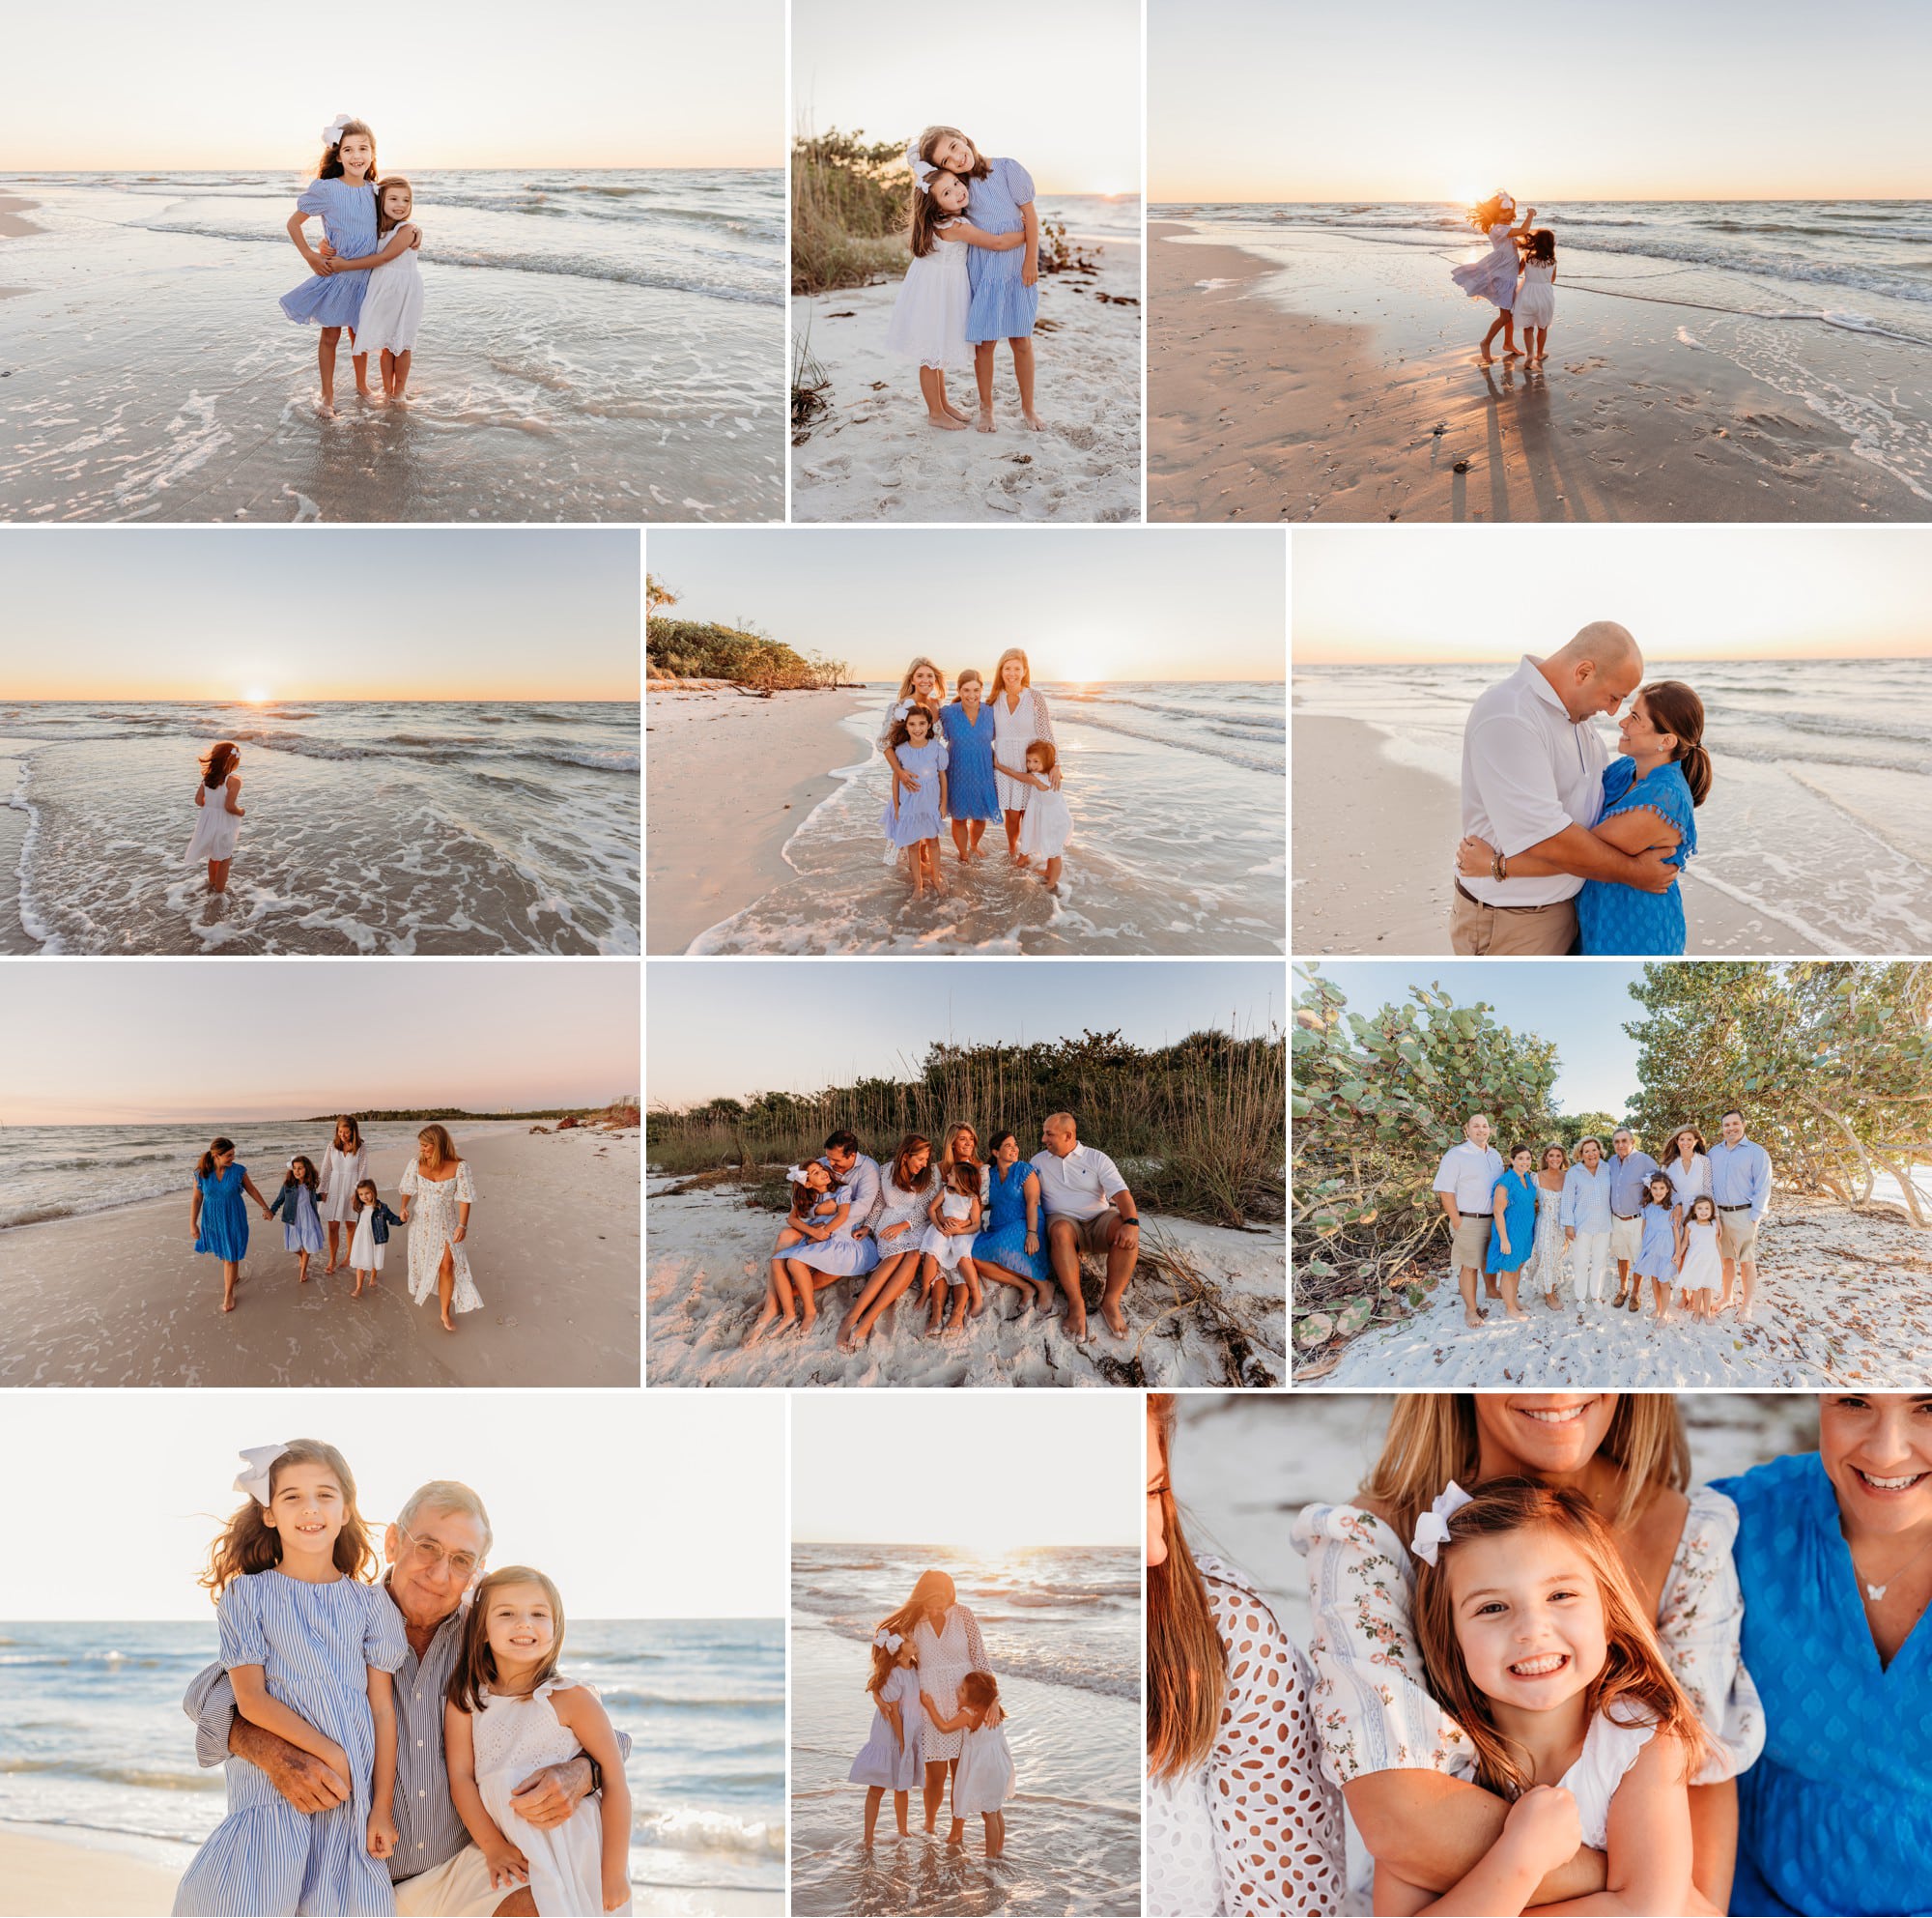 Naples Family Photo Session on the beach with Grandparents and Grandkids. Extended family portraits on a Winter evening. 